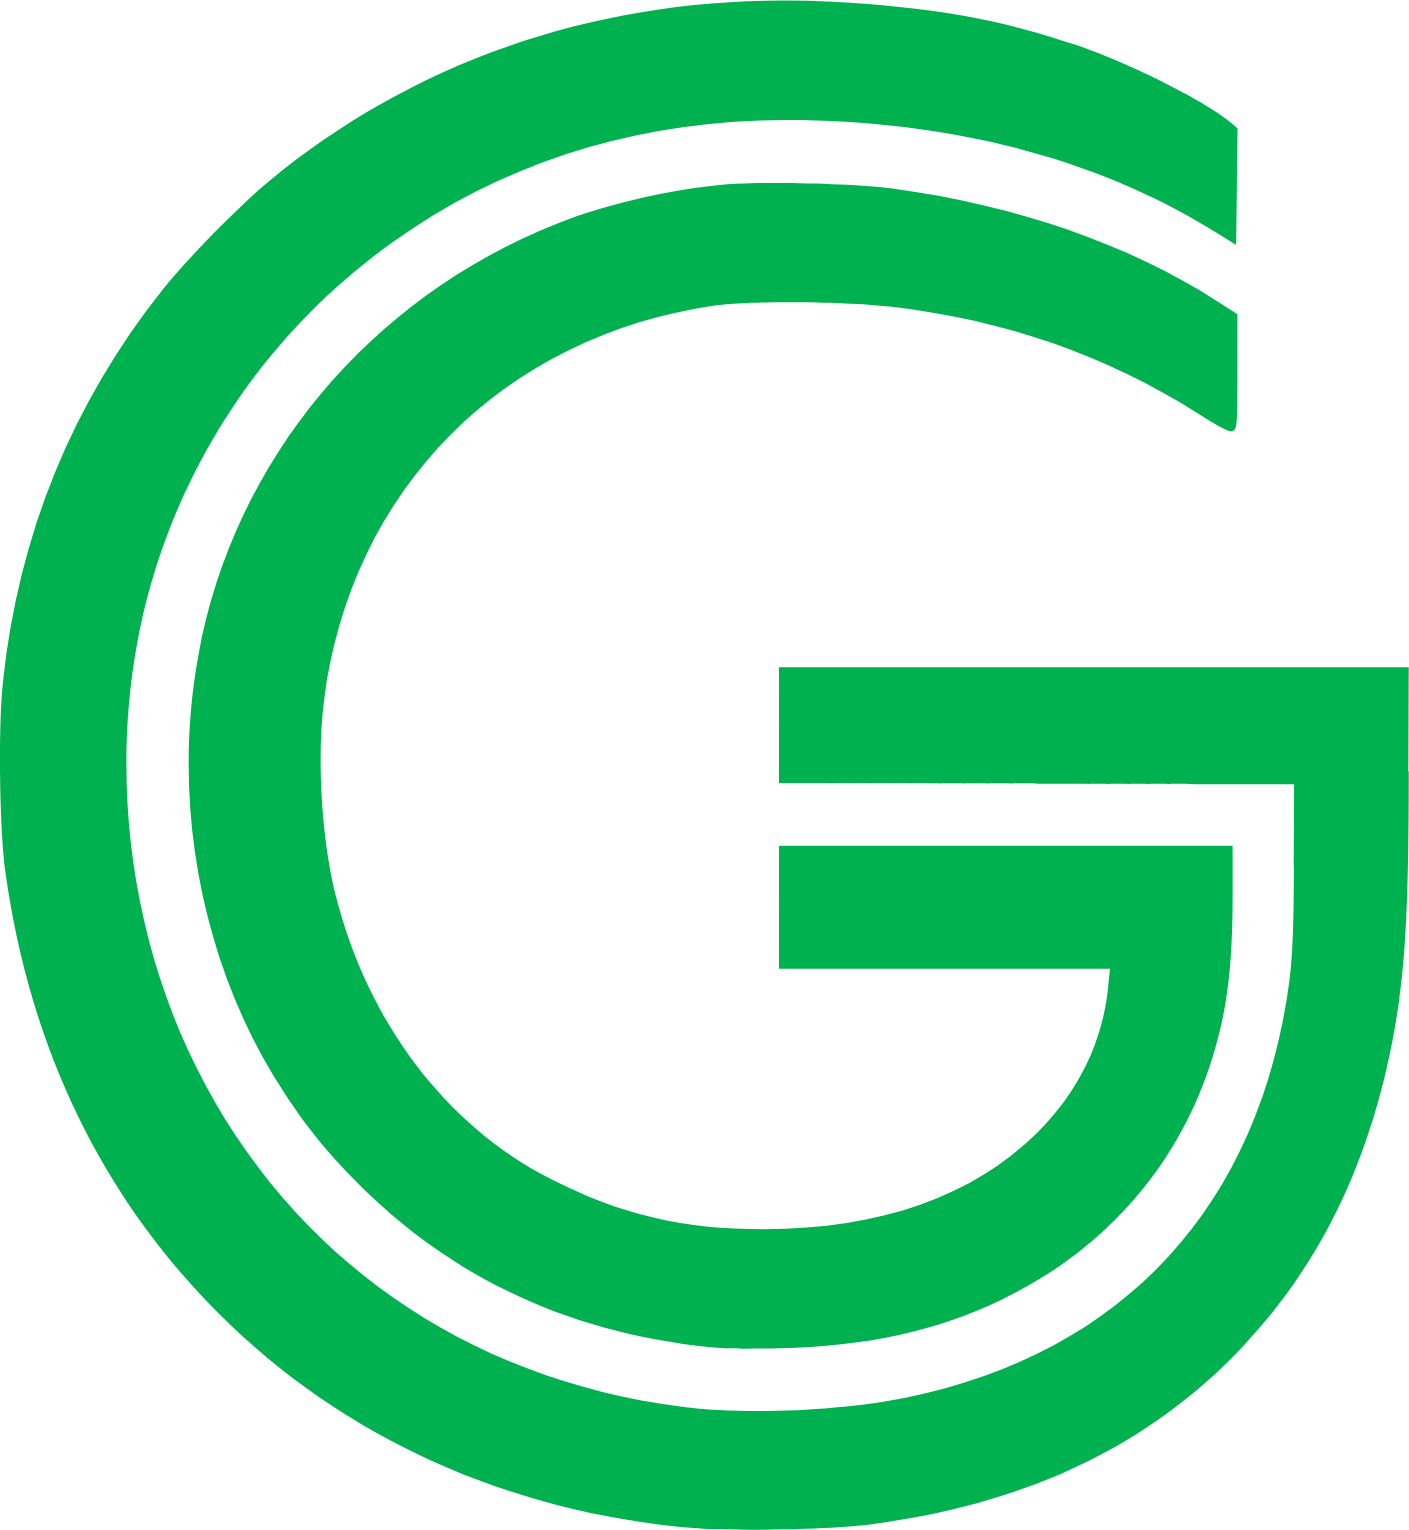 Grab appoints Tarin Thaniyavarn as the new Country Head for Grab Thailand |  Techsauce